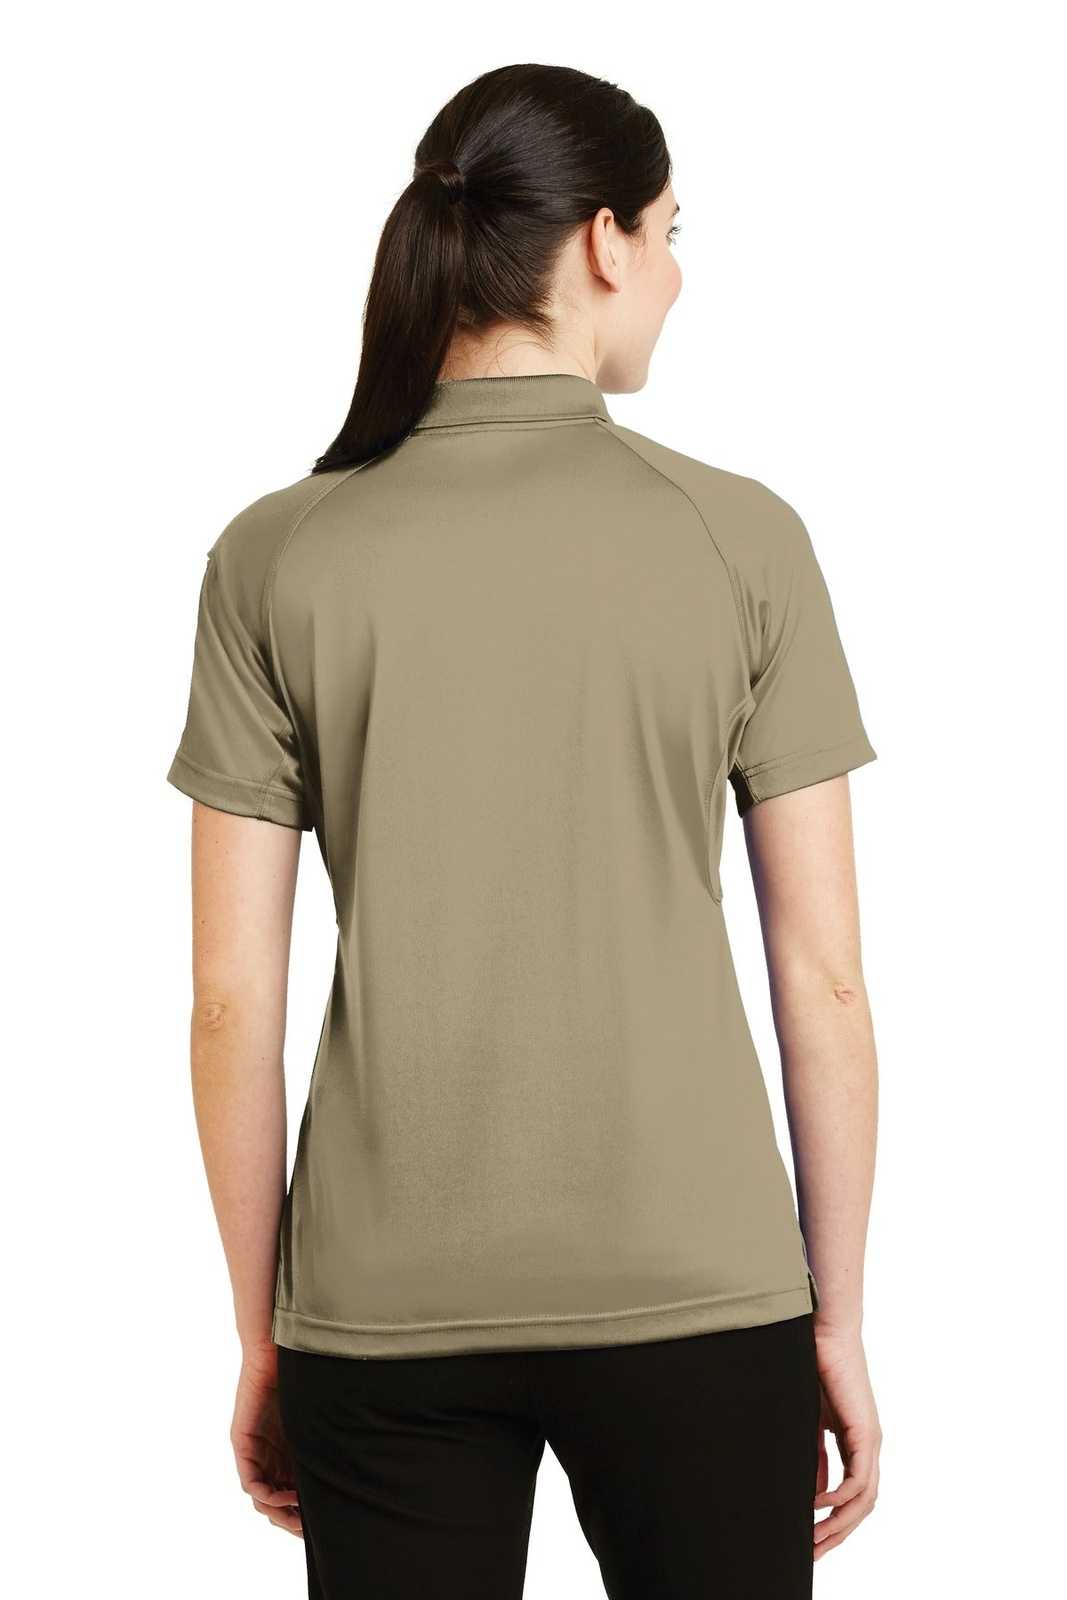 CornerStone CS411 Ladies Select Snag-Proof Tactical Polo - Tan - HIT a Double - 2